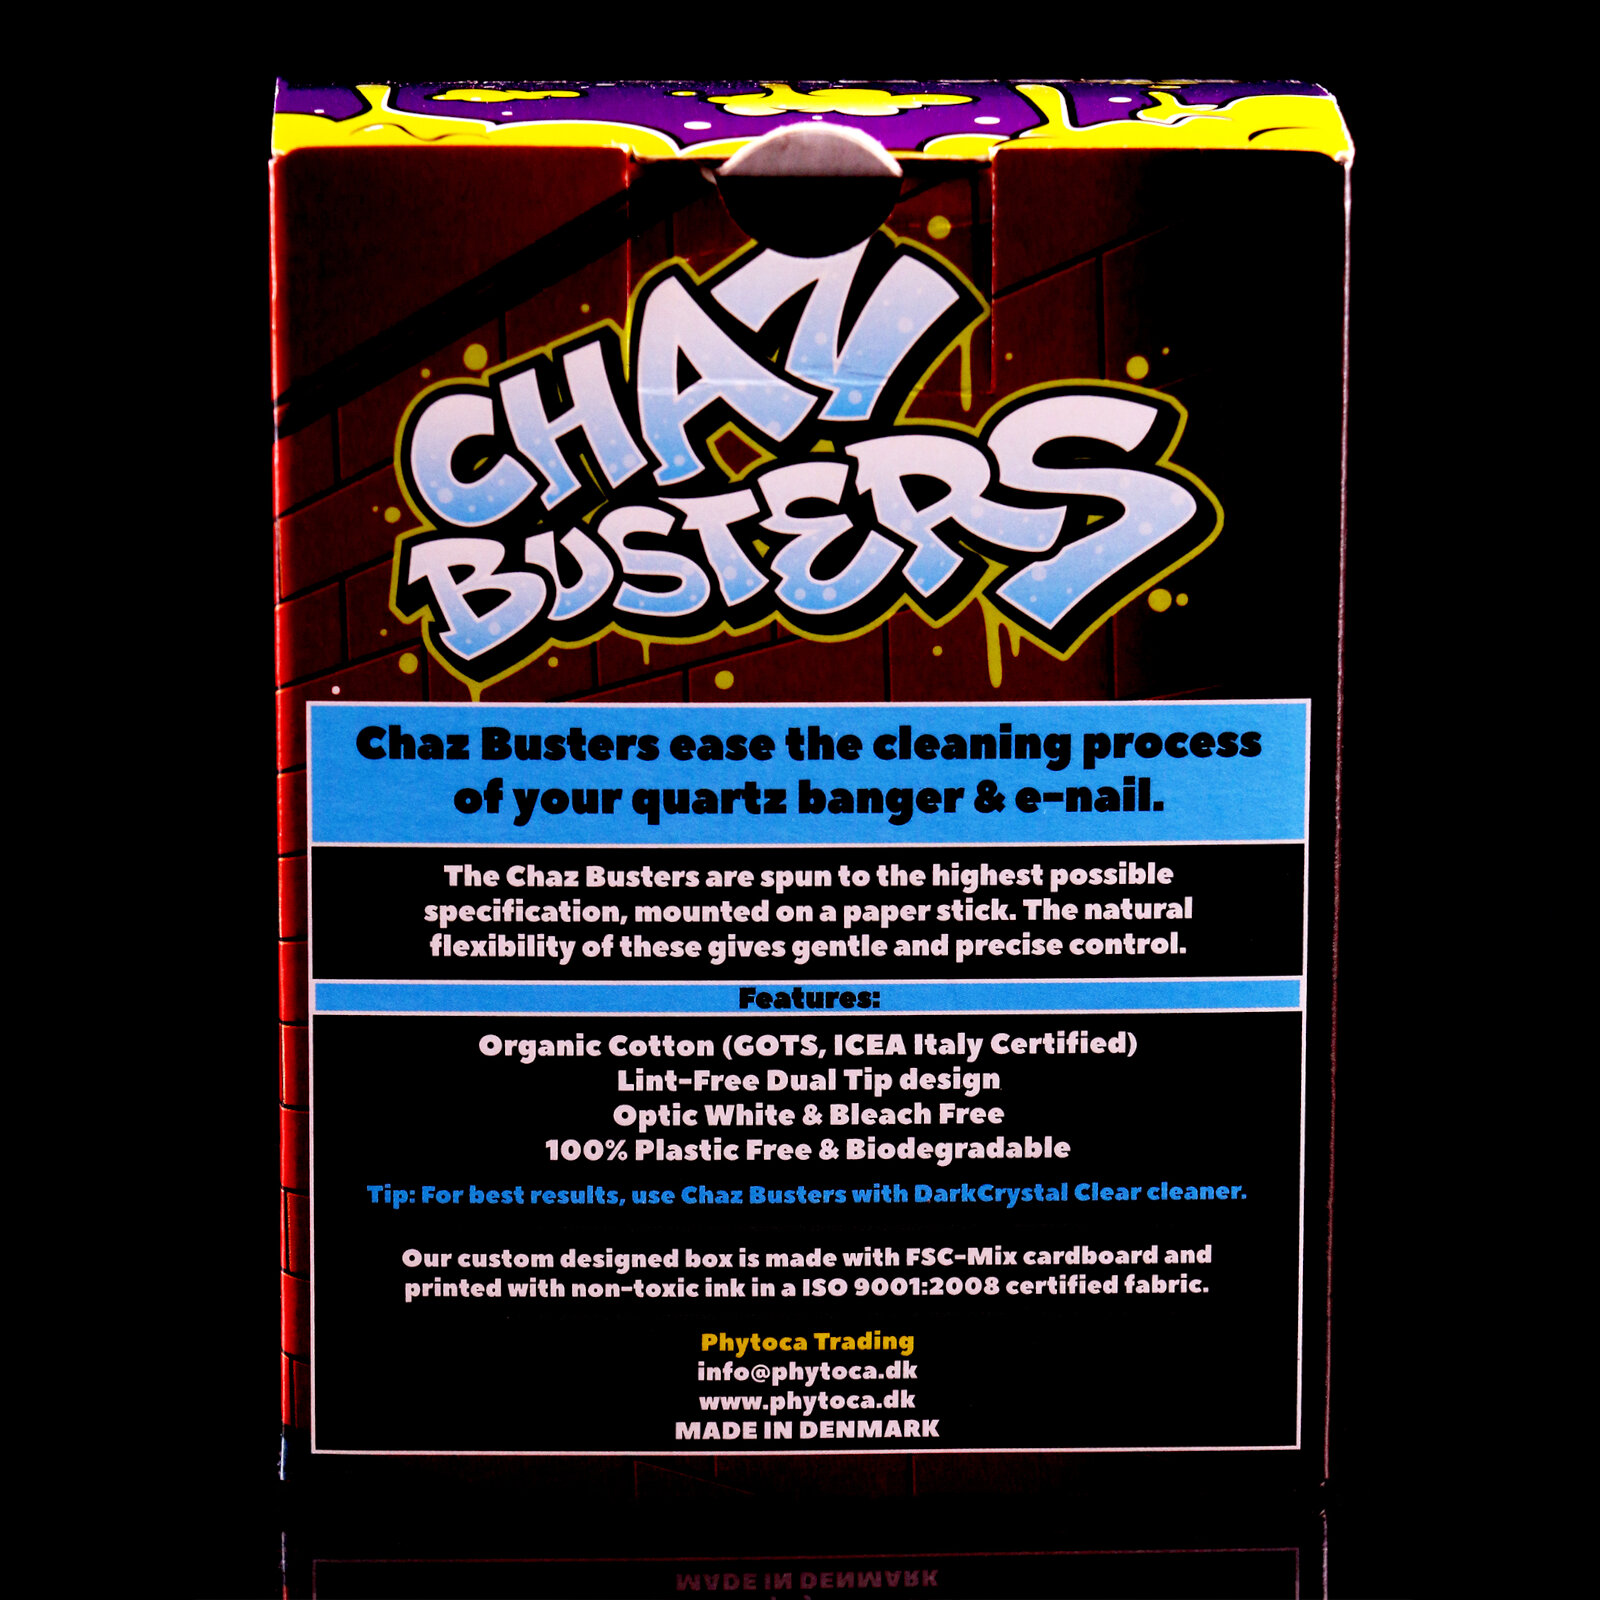 Chaz Busters